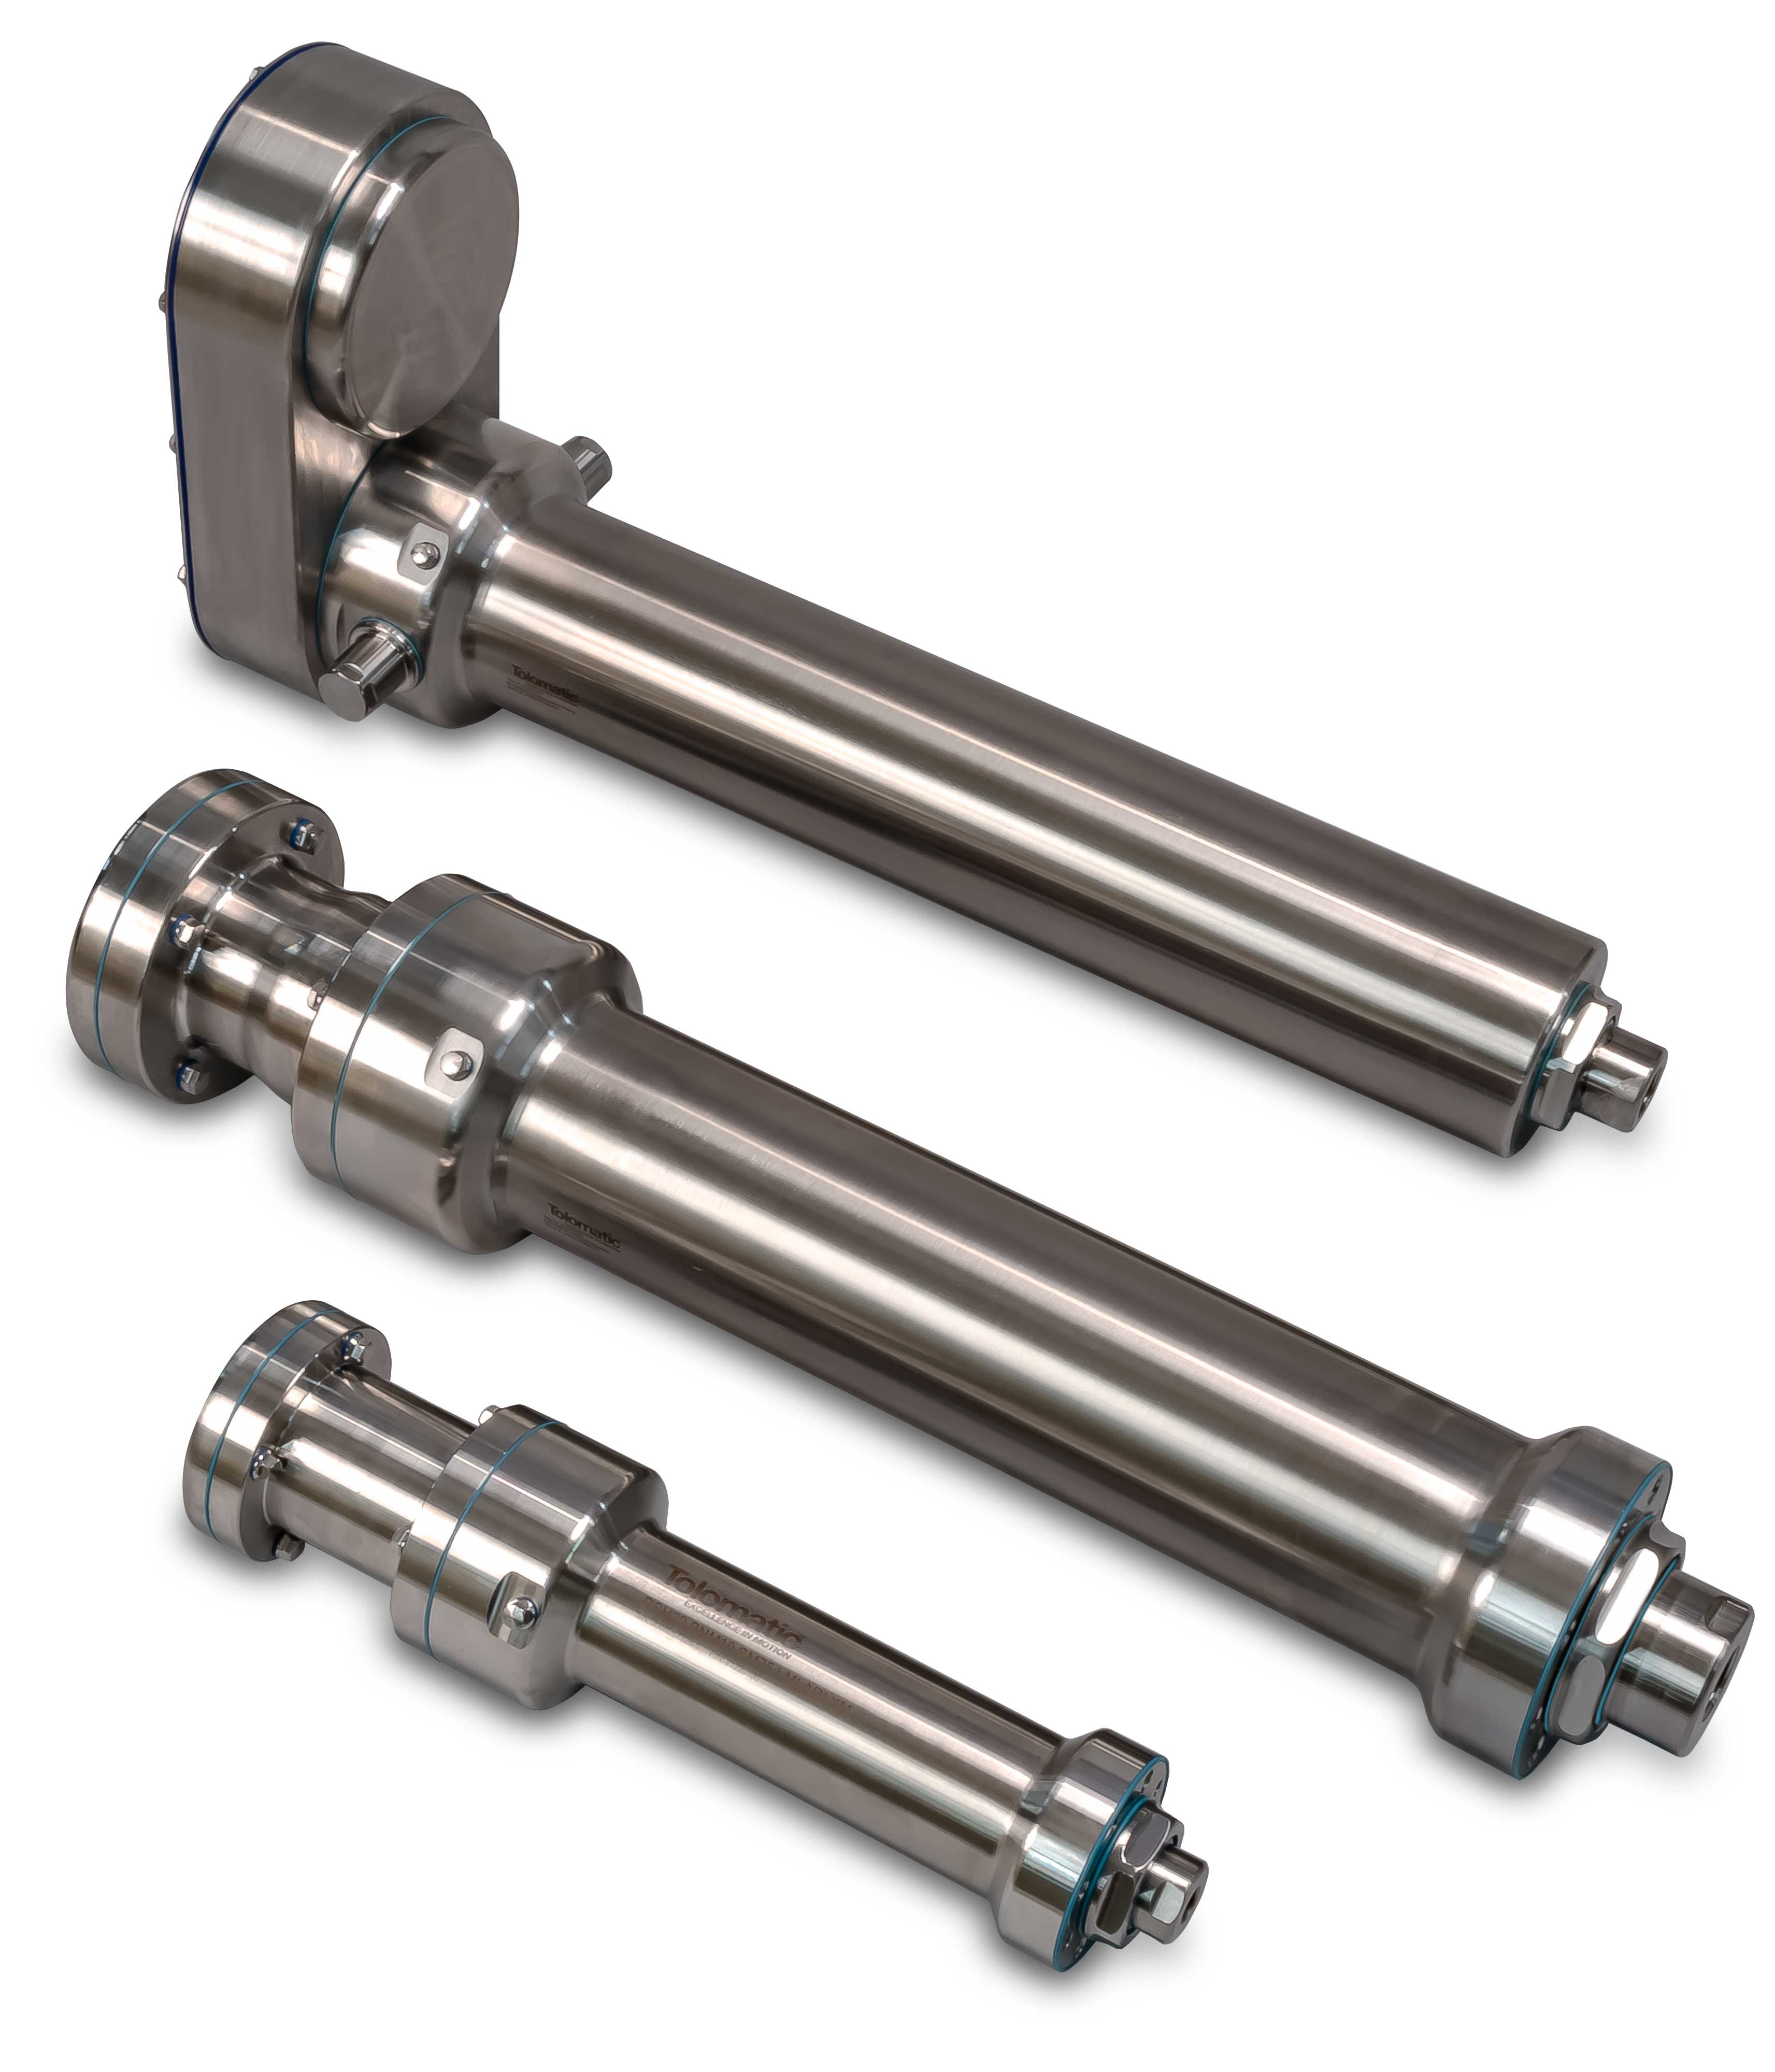 RSH series: Electric stainless steel actuators for applications in hygiene-sensitive areas